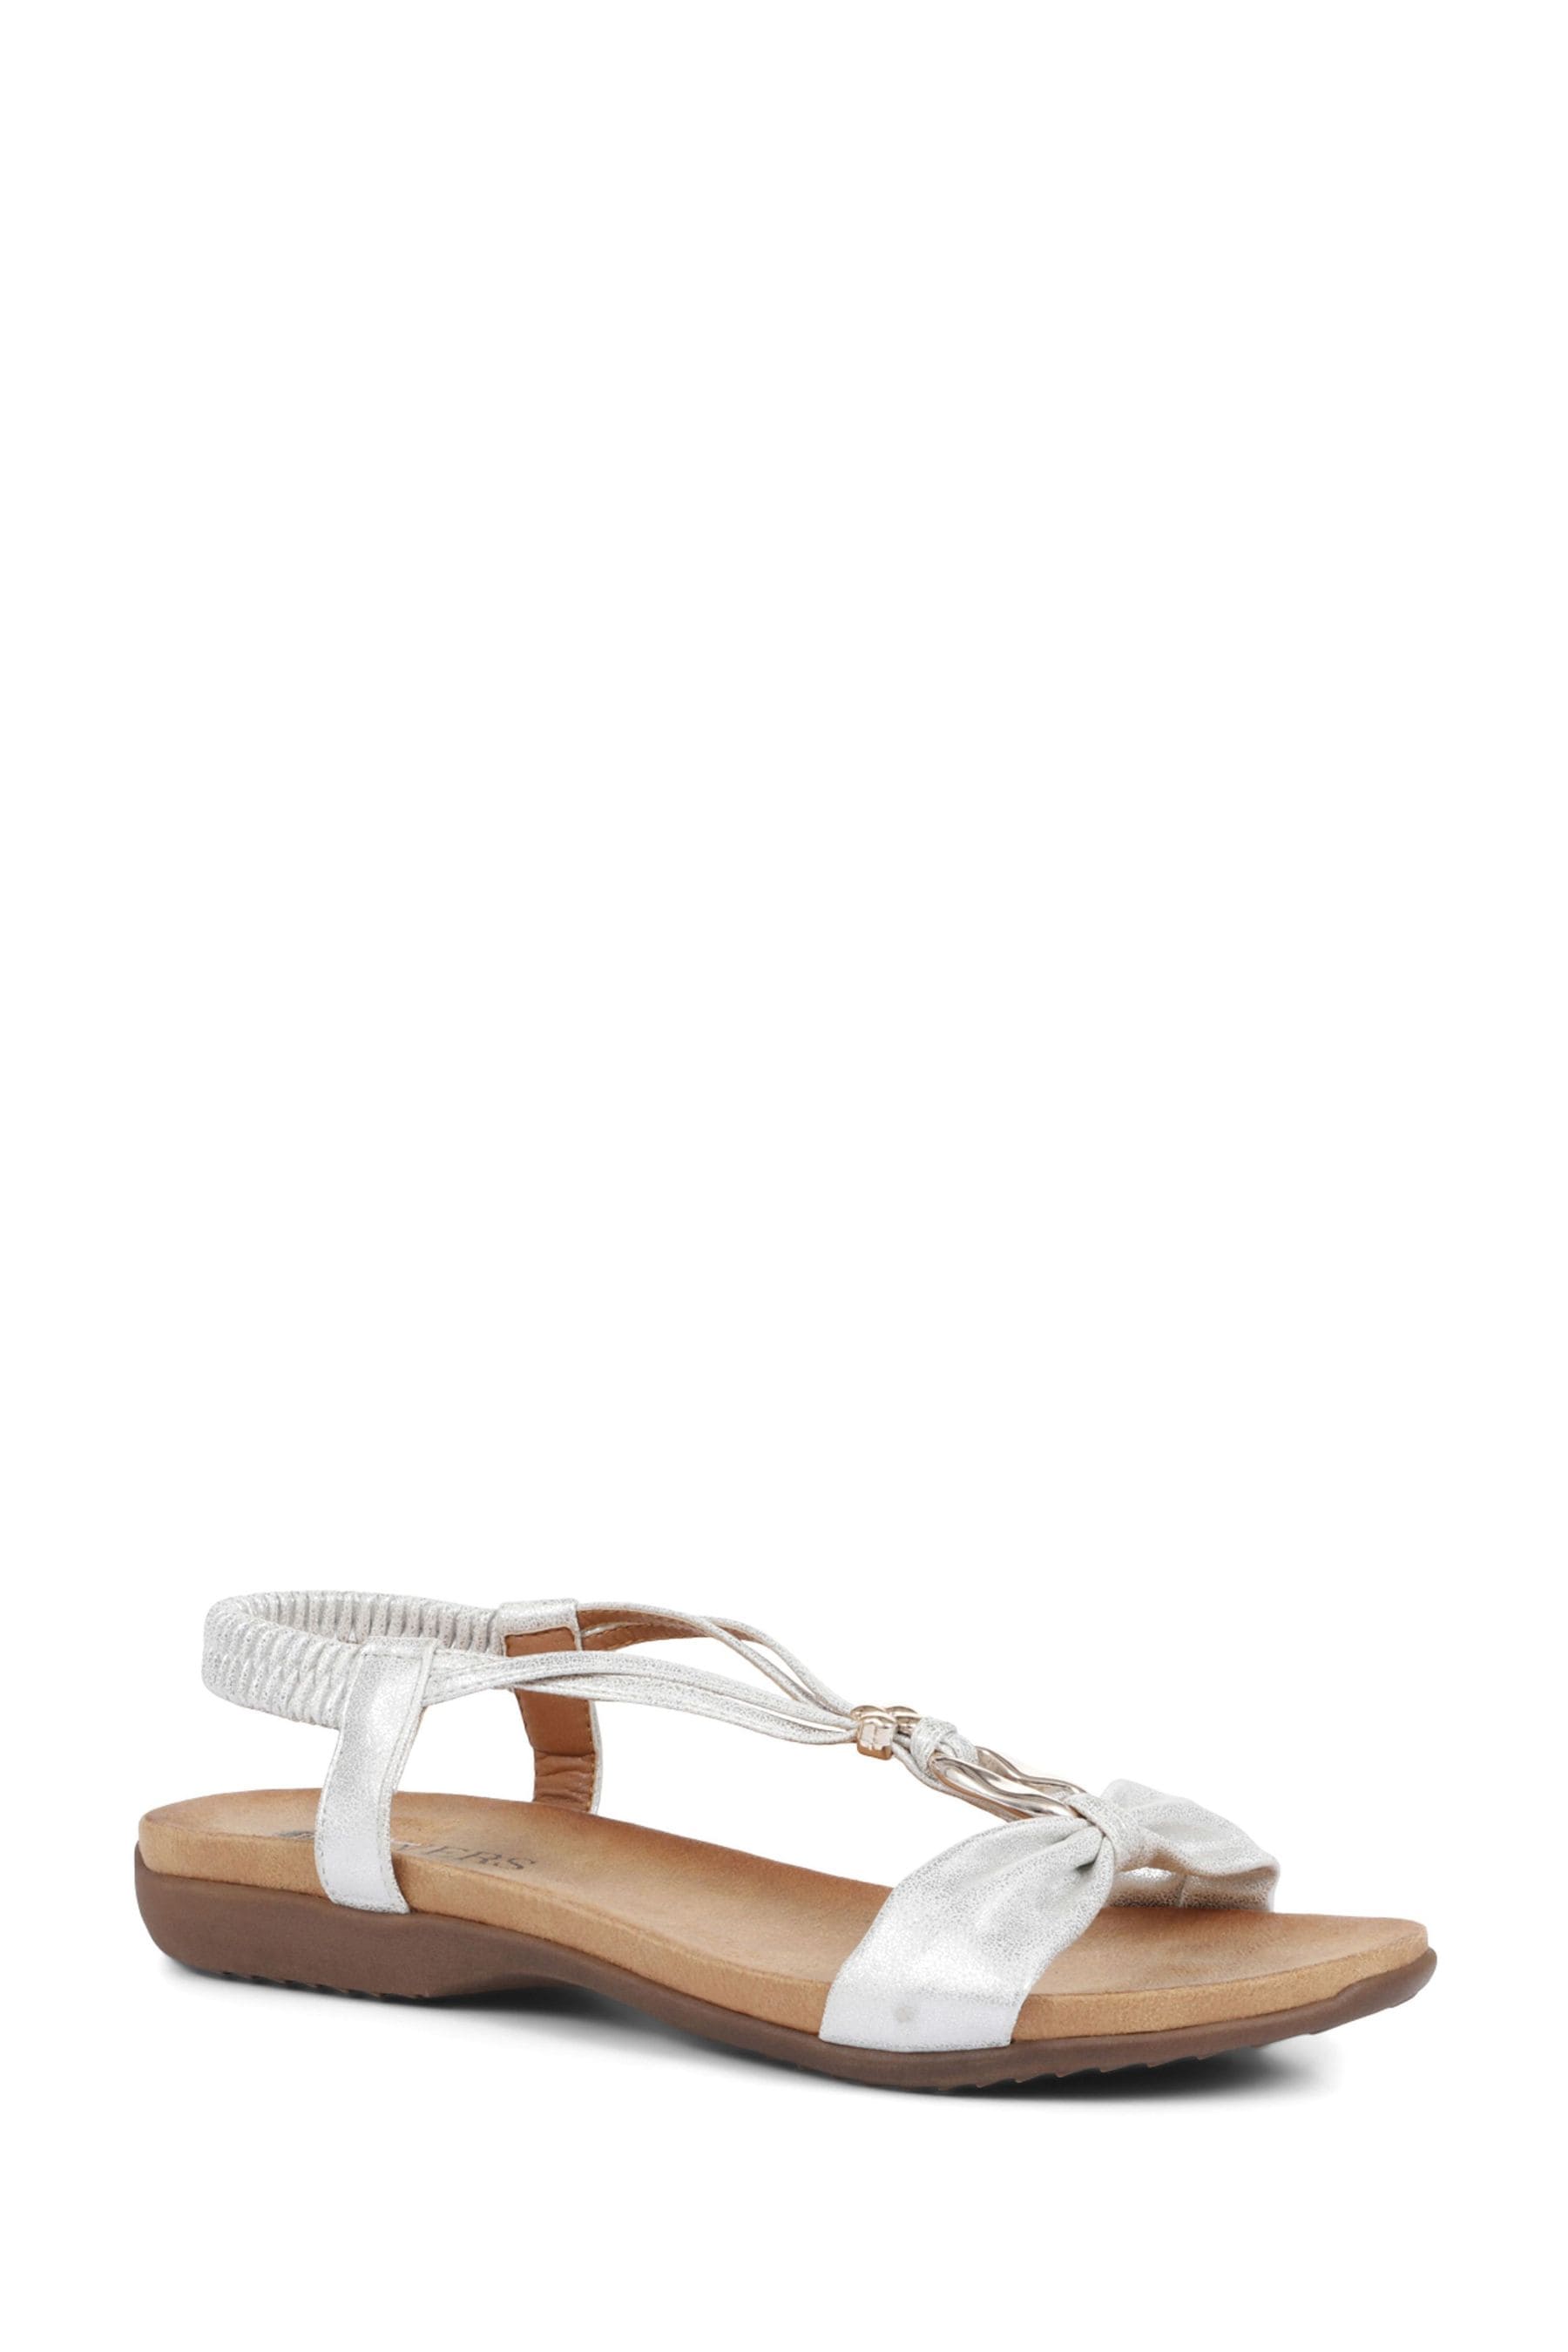 Buy Pavers White Flat-Strappy-Sandal from the Next UK online shop